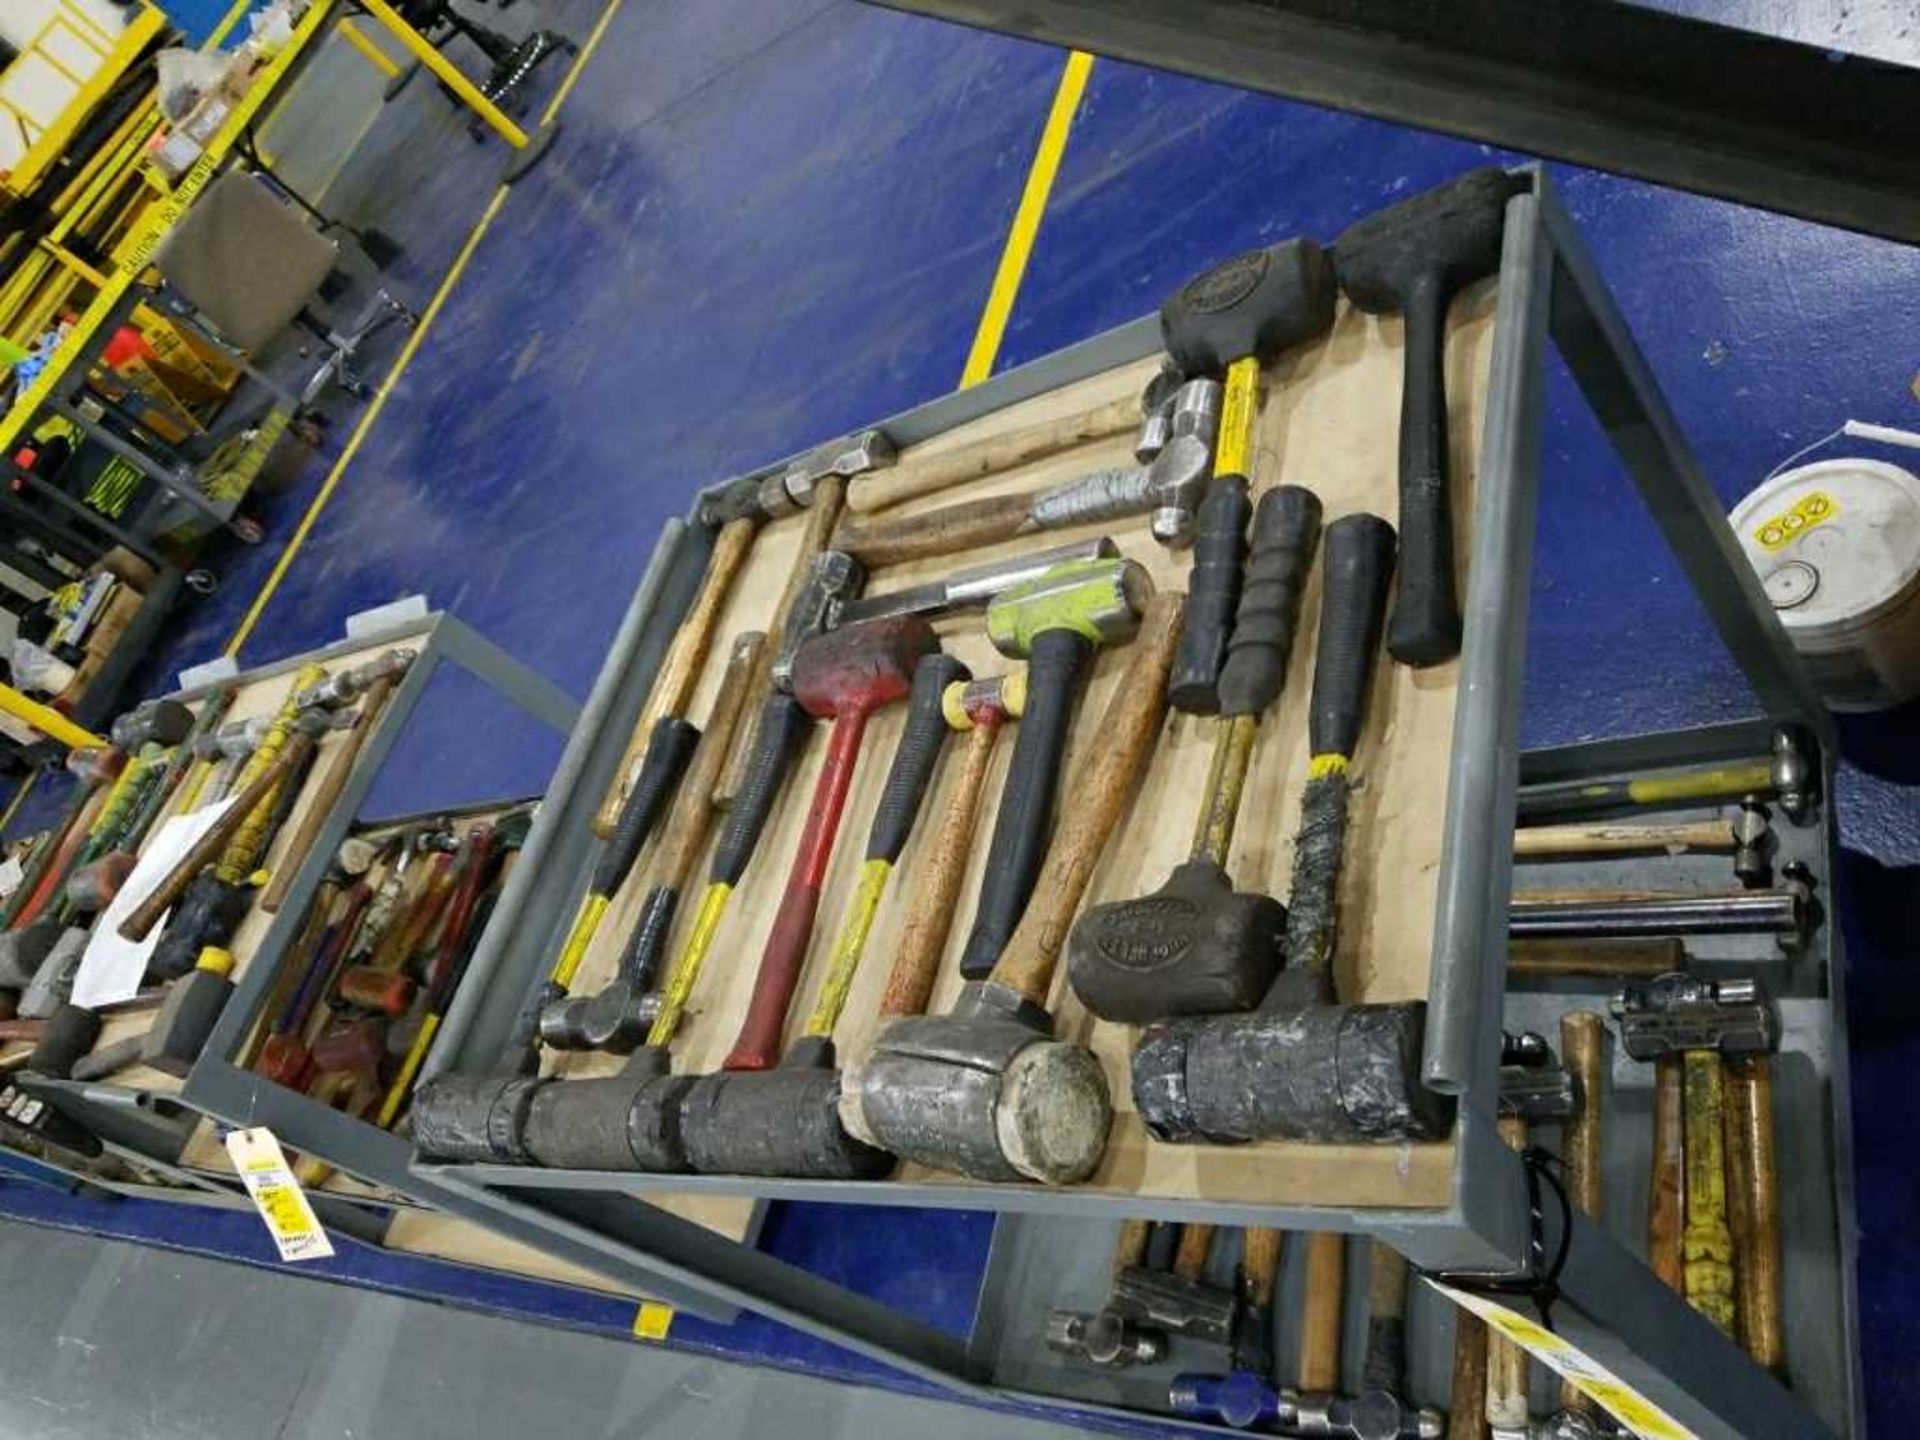 Cart with all types of hammers